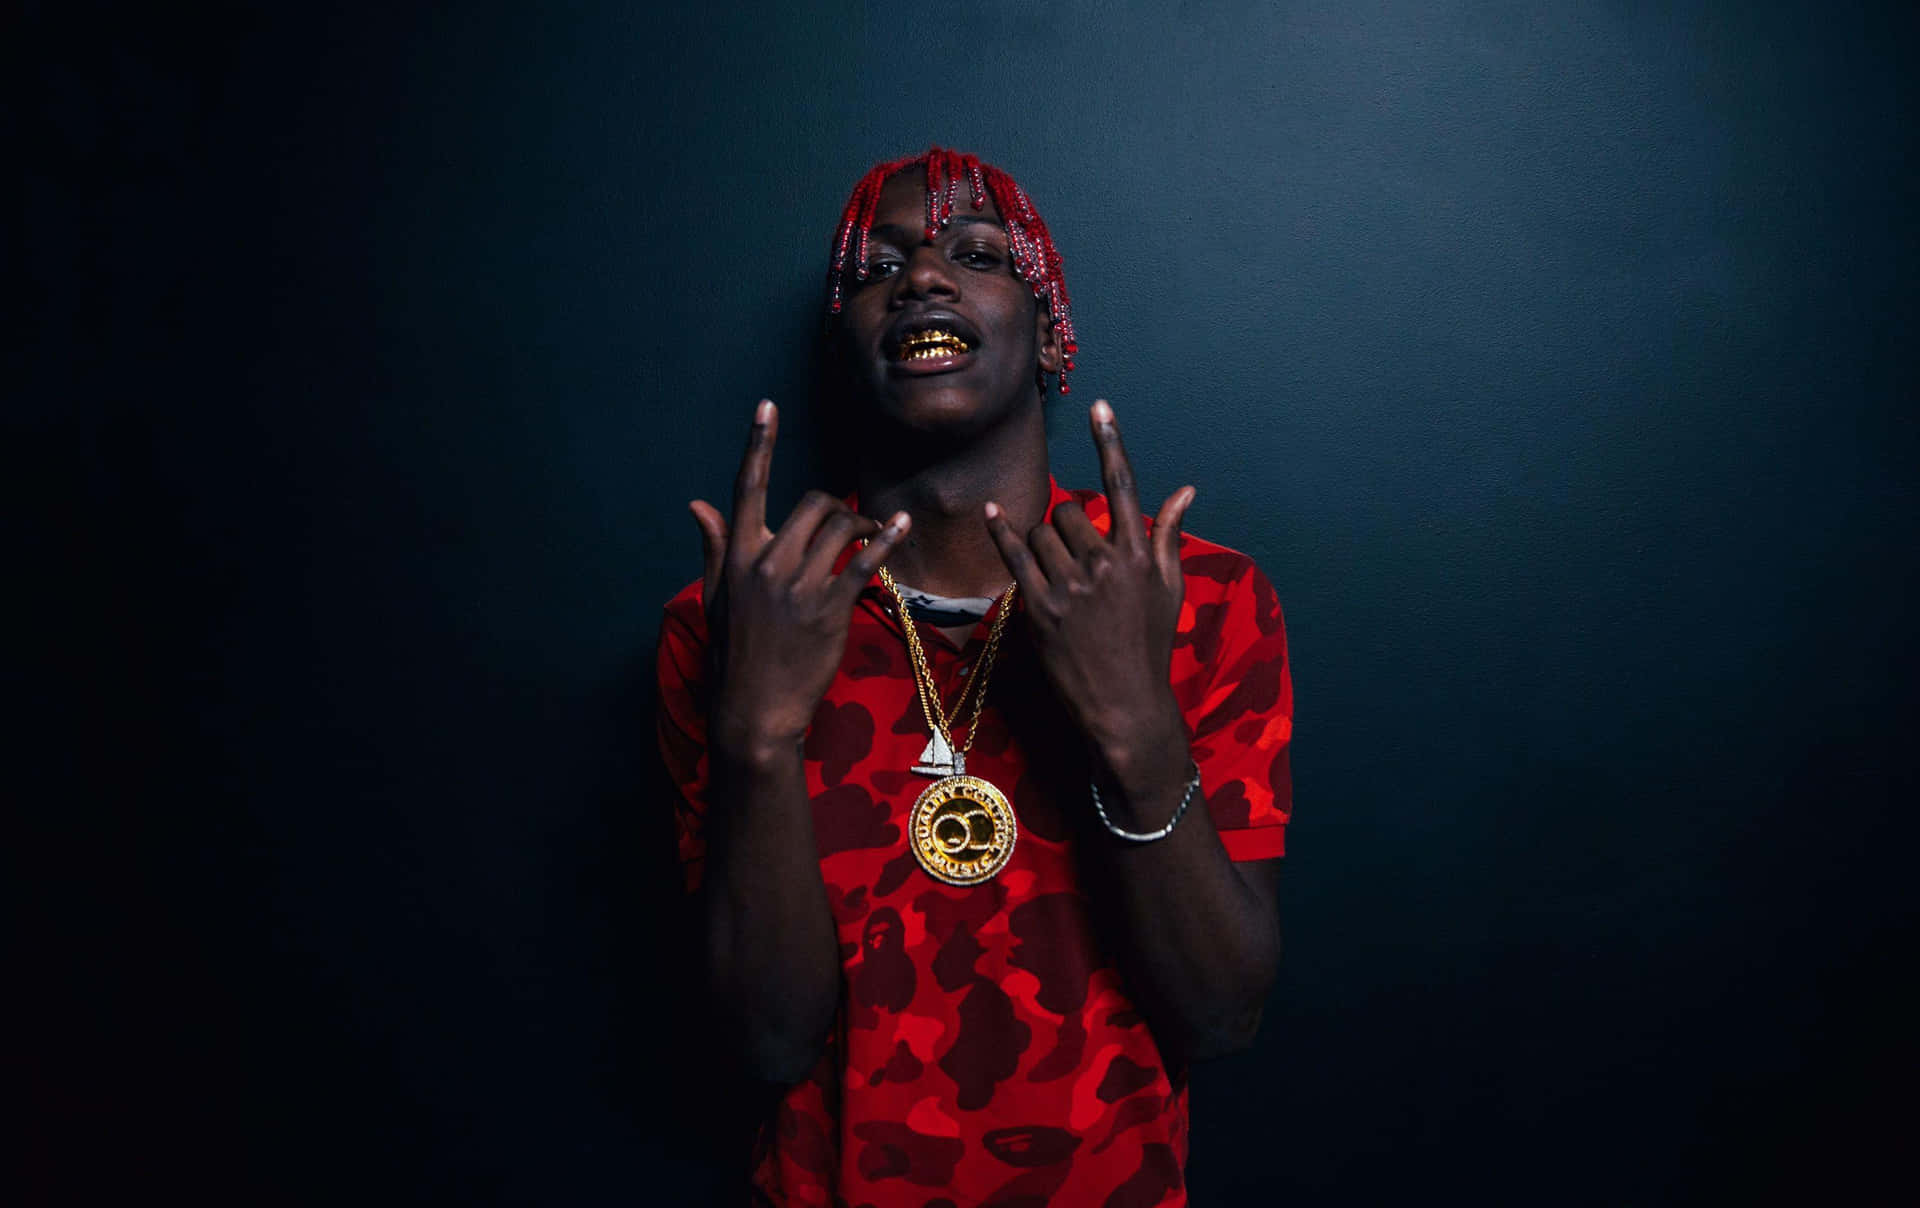 Lil Yachty, the Passionate Rapper Wallpaper